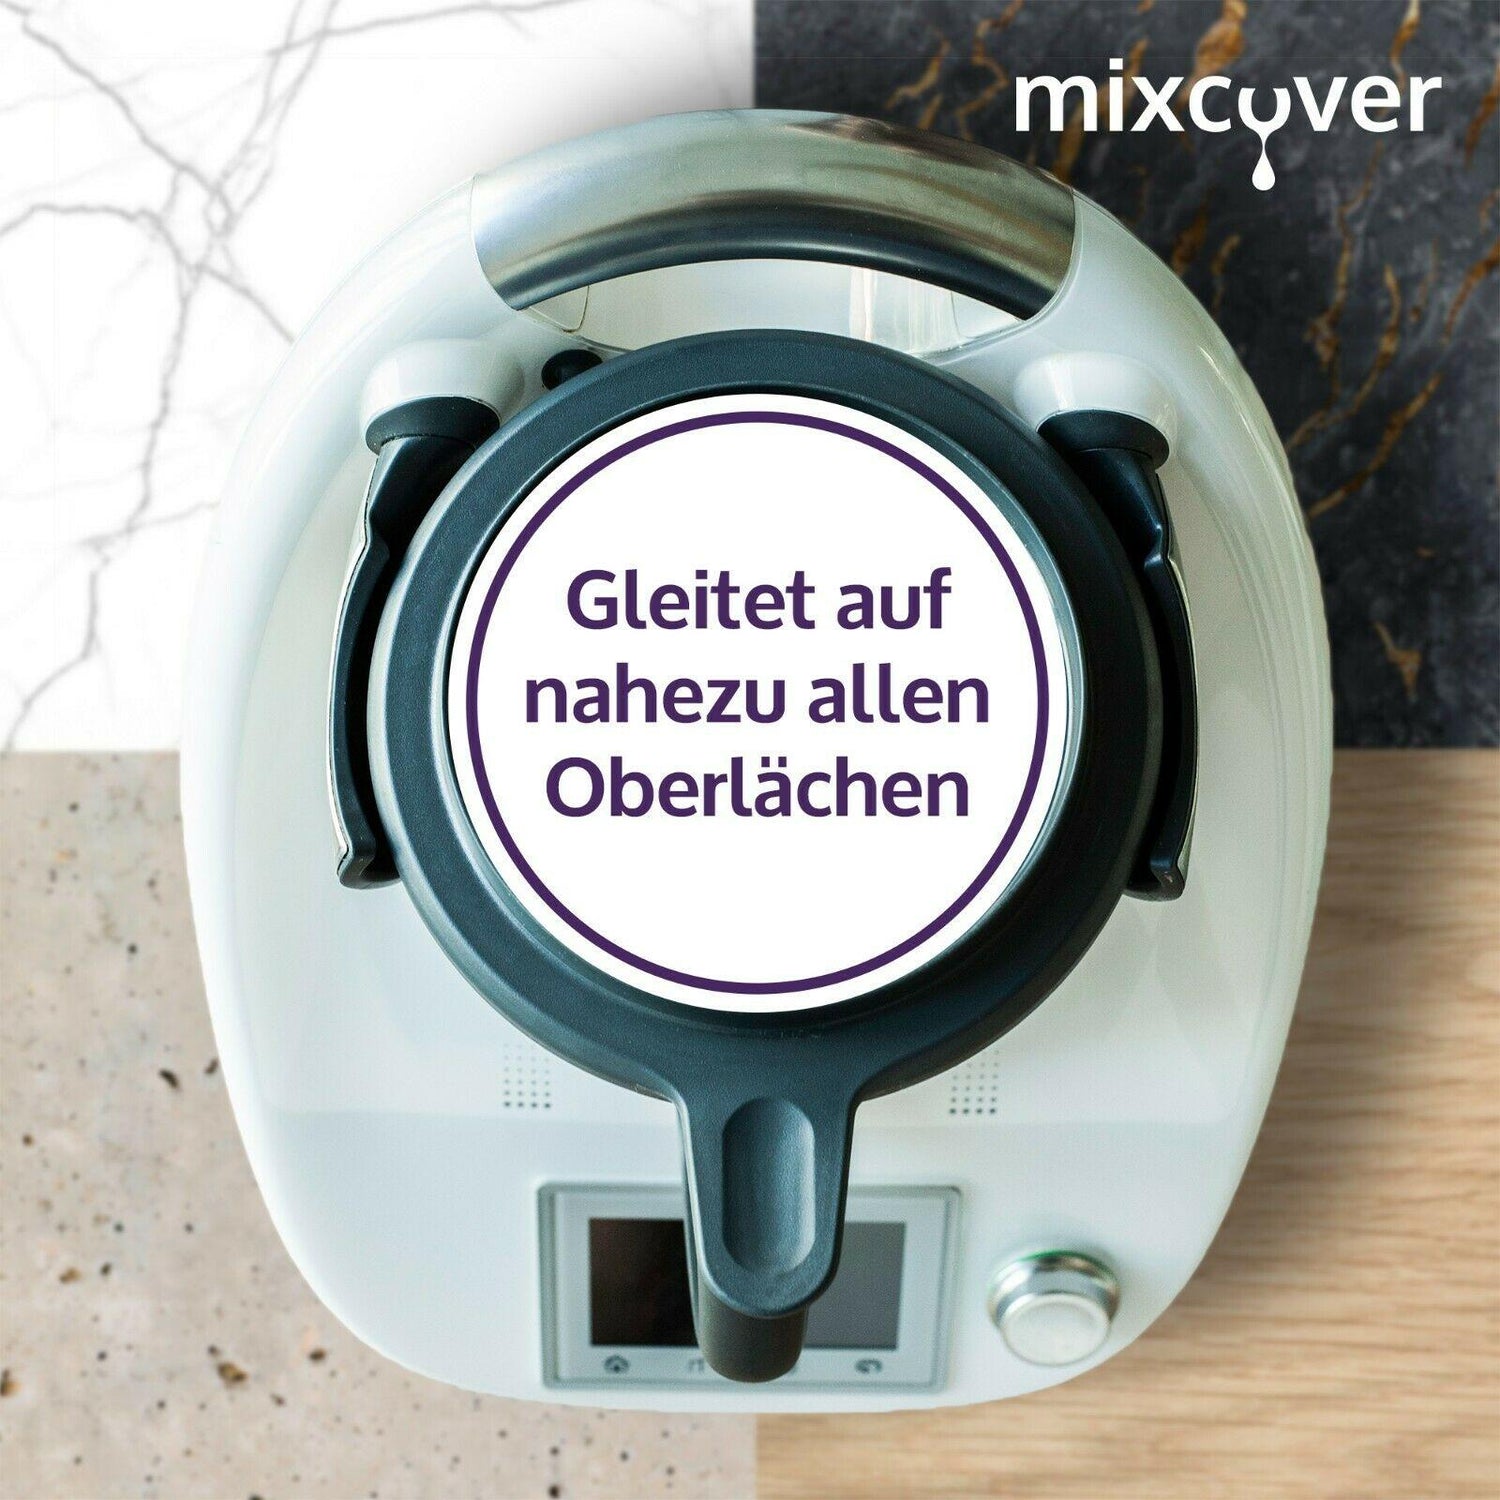 Mixcover Invisible glider/slider for the Thermomix TM6 & TM5 1 Set